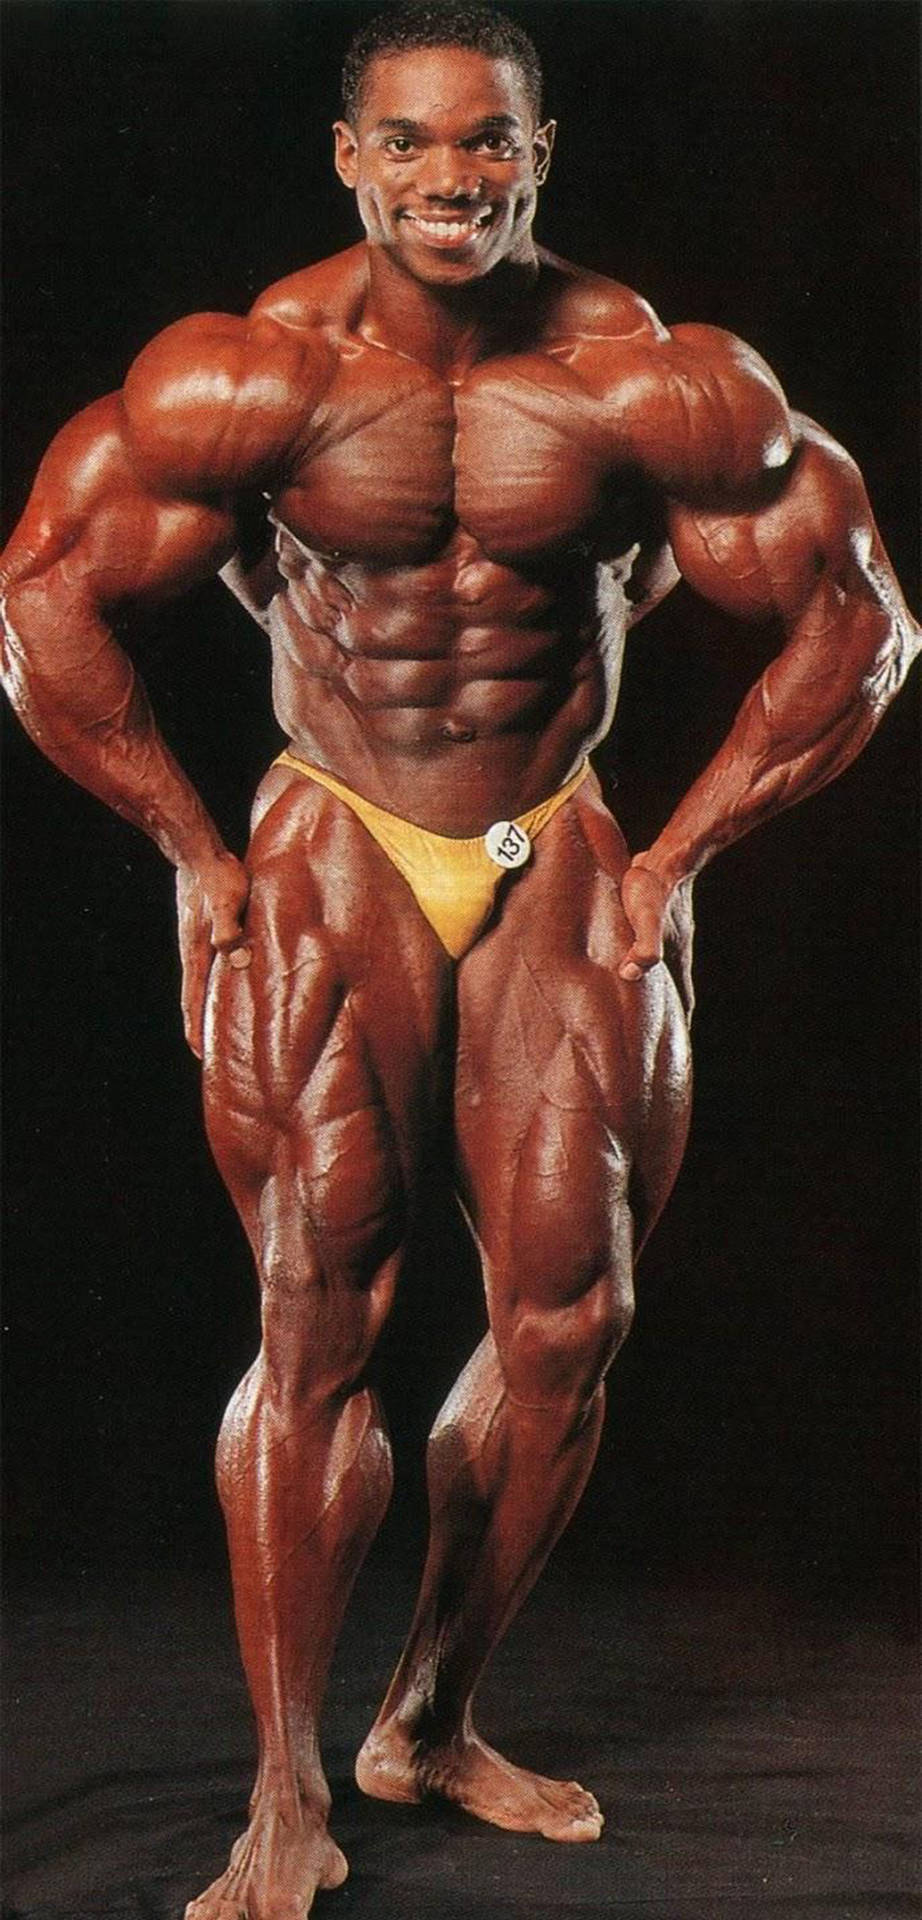 Beefyflex Wheeler Does Not Have A Specific Translation In Spanish, As It Is A Name. However, If We Were To Translate The Phrase 